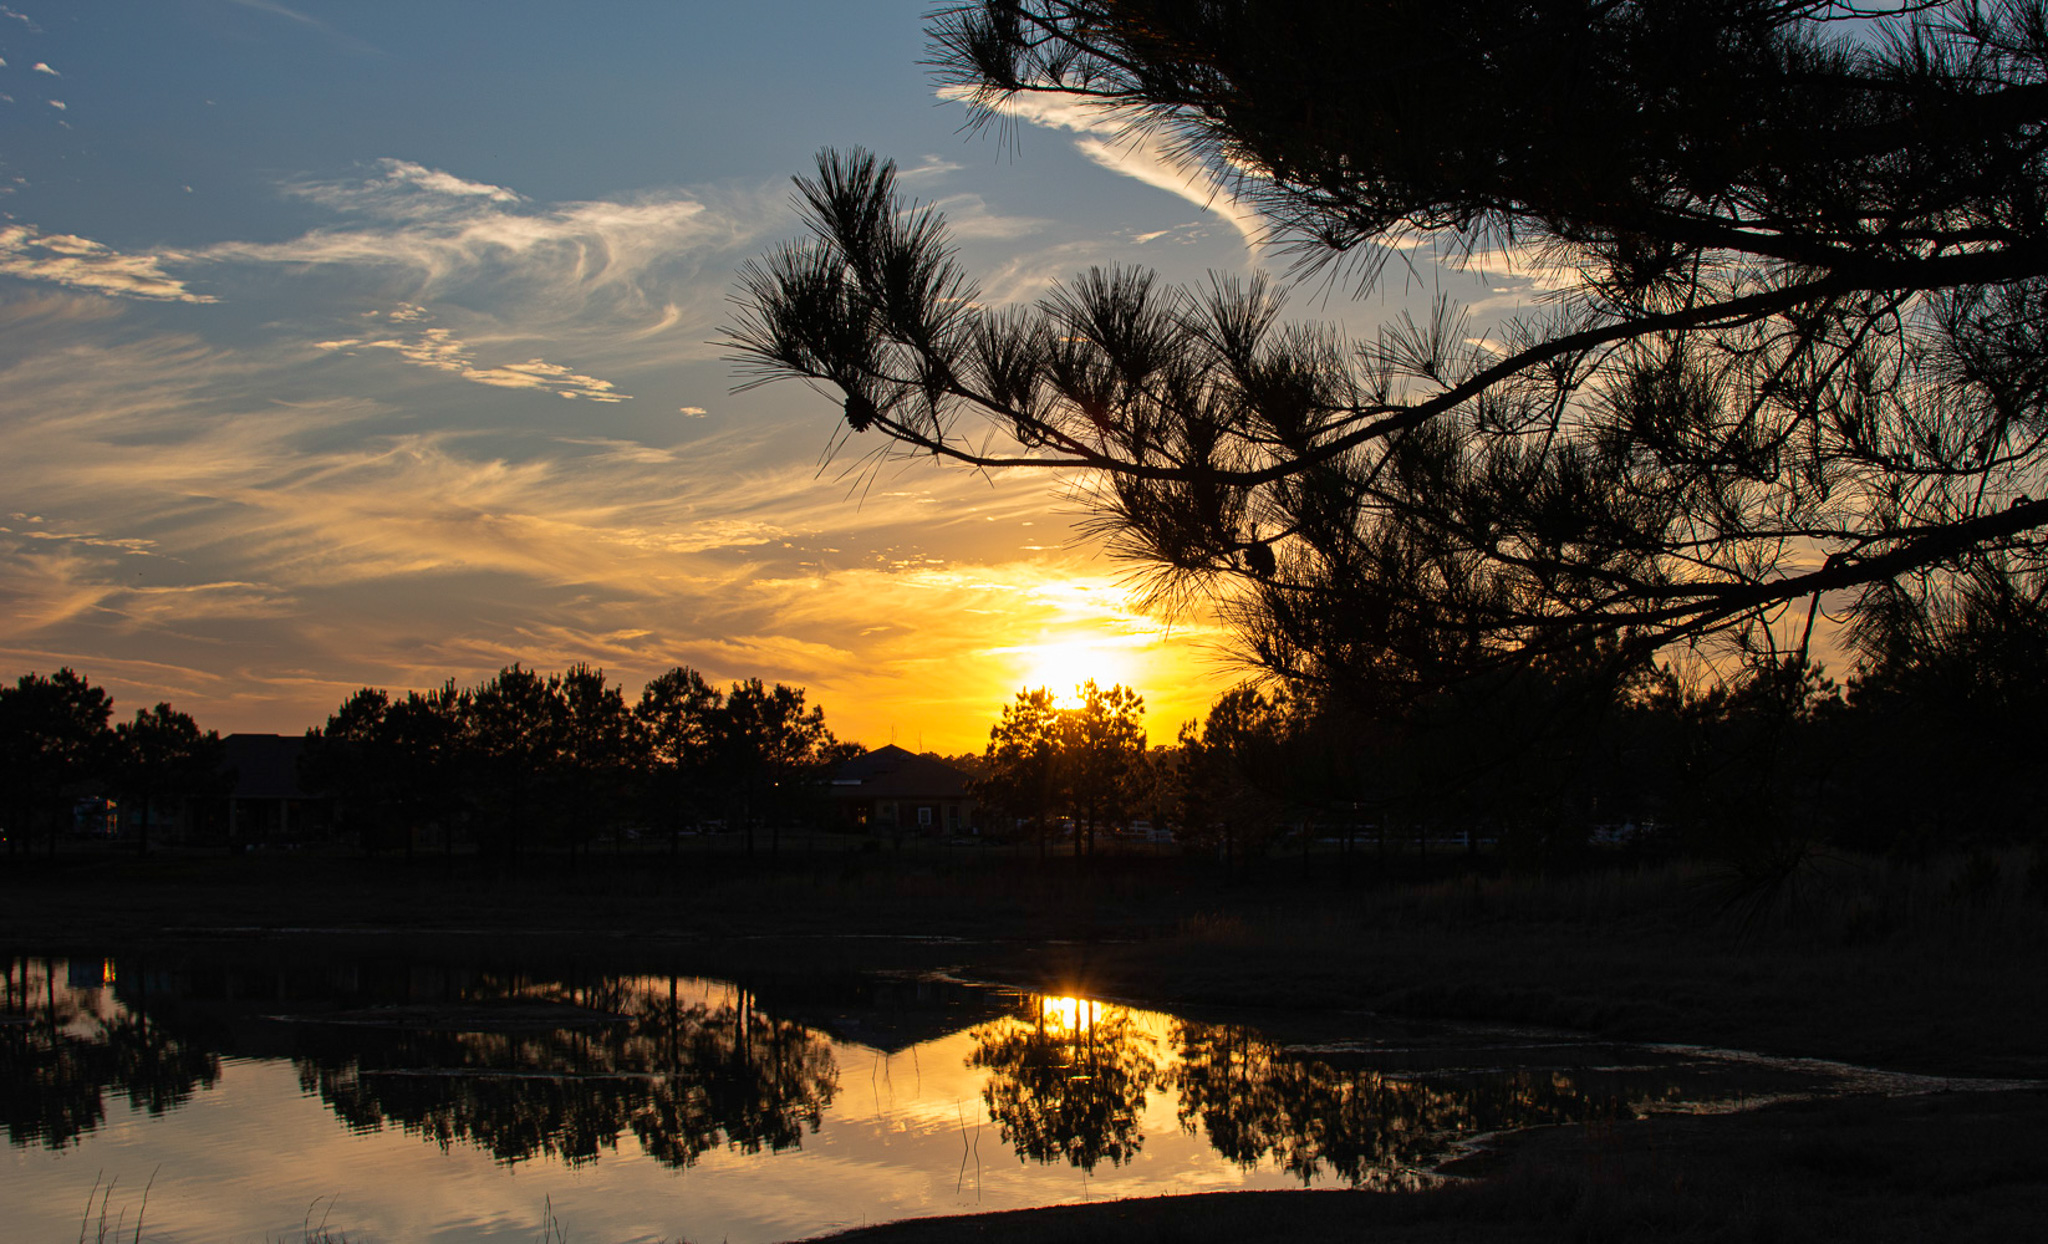 Sunset over the lake with sun glowing on the horizon against a blue sky; the shoreline reflected in the water and the branches of a pine tree in focus on the right side